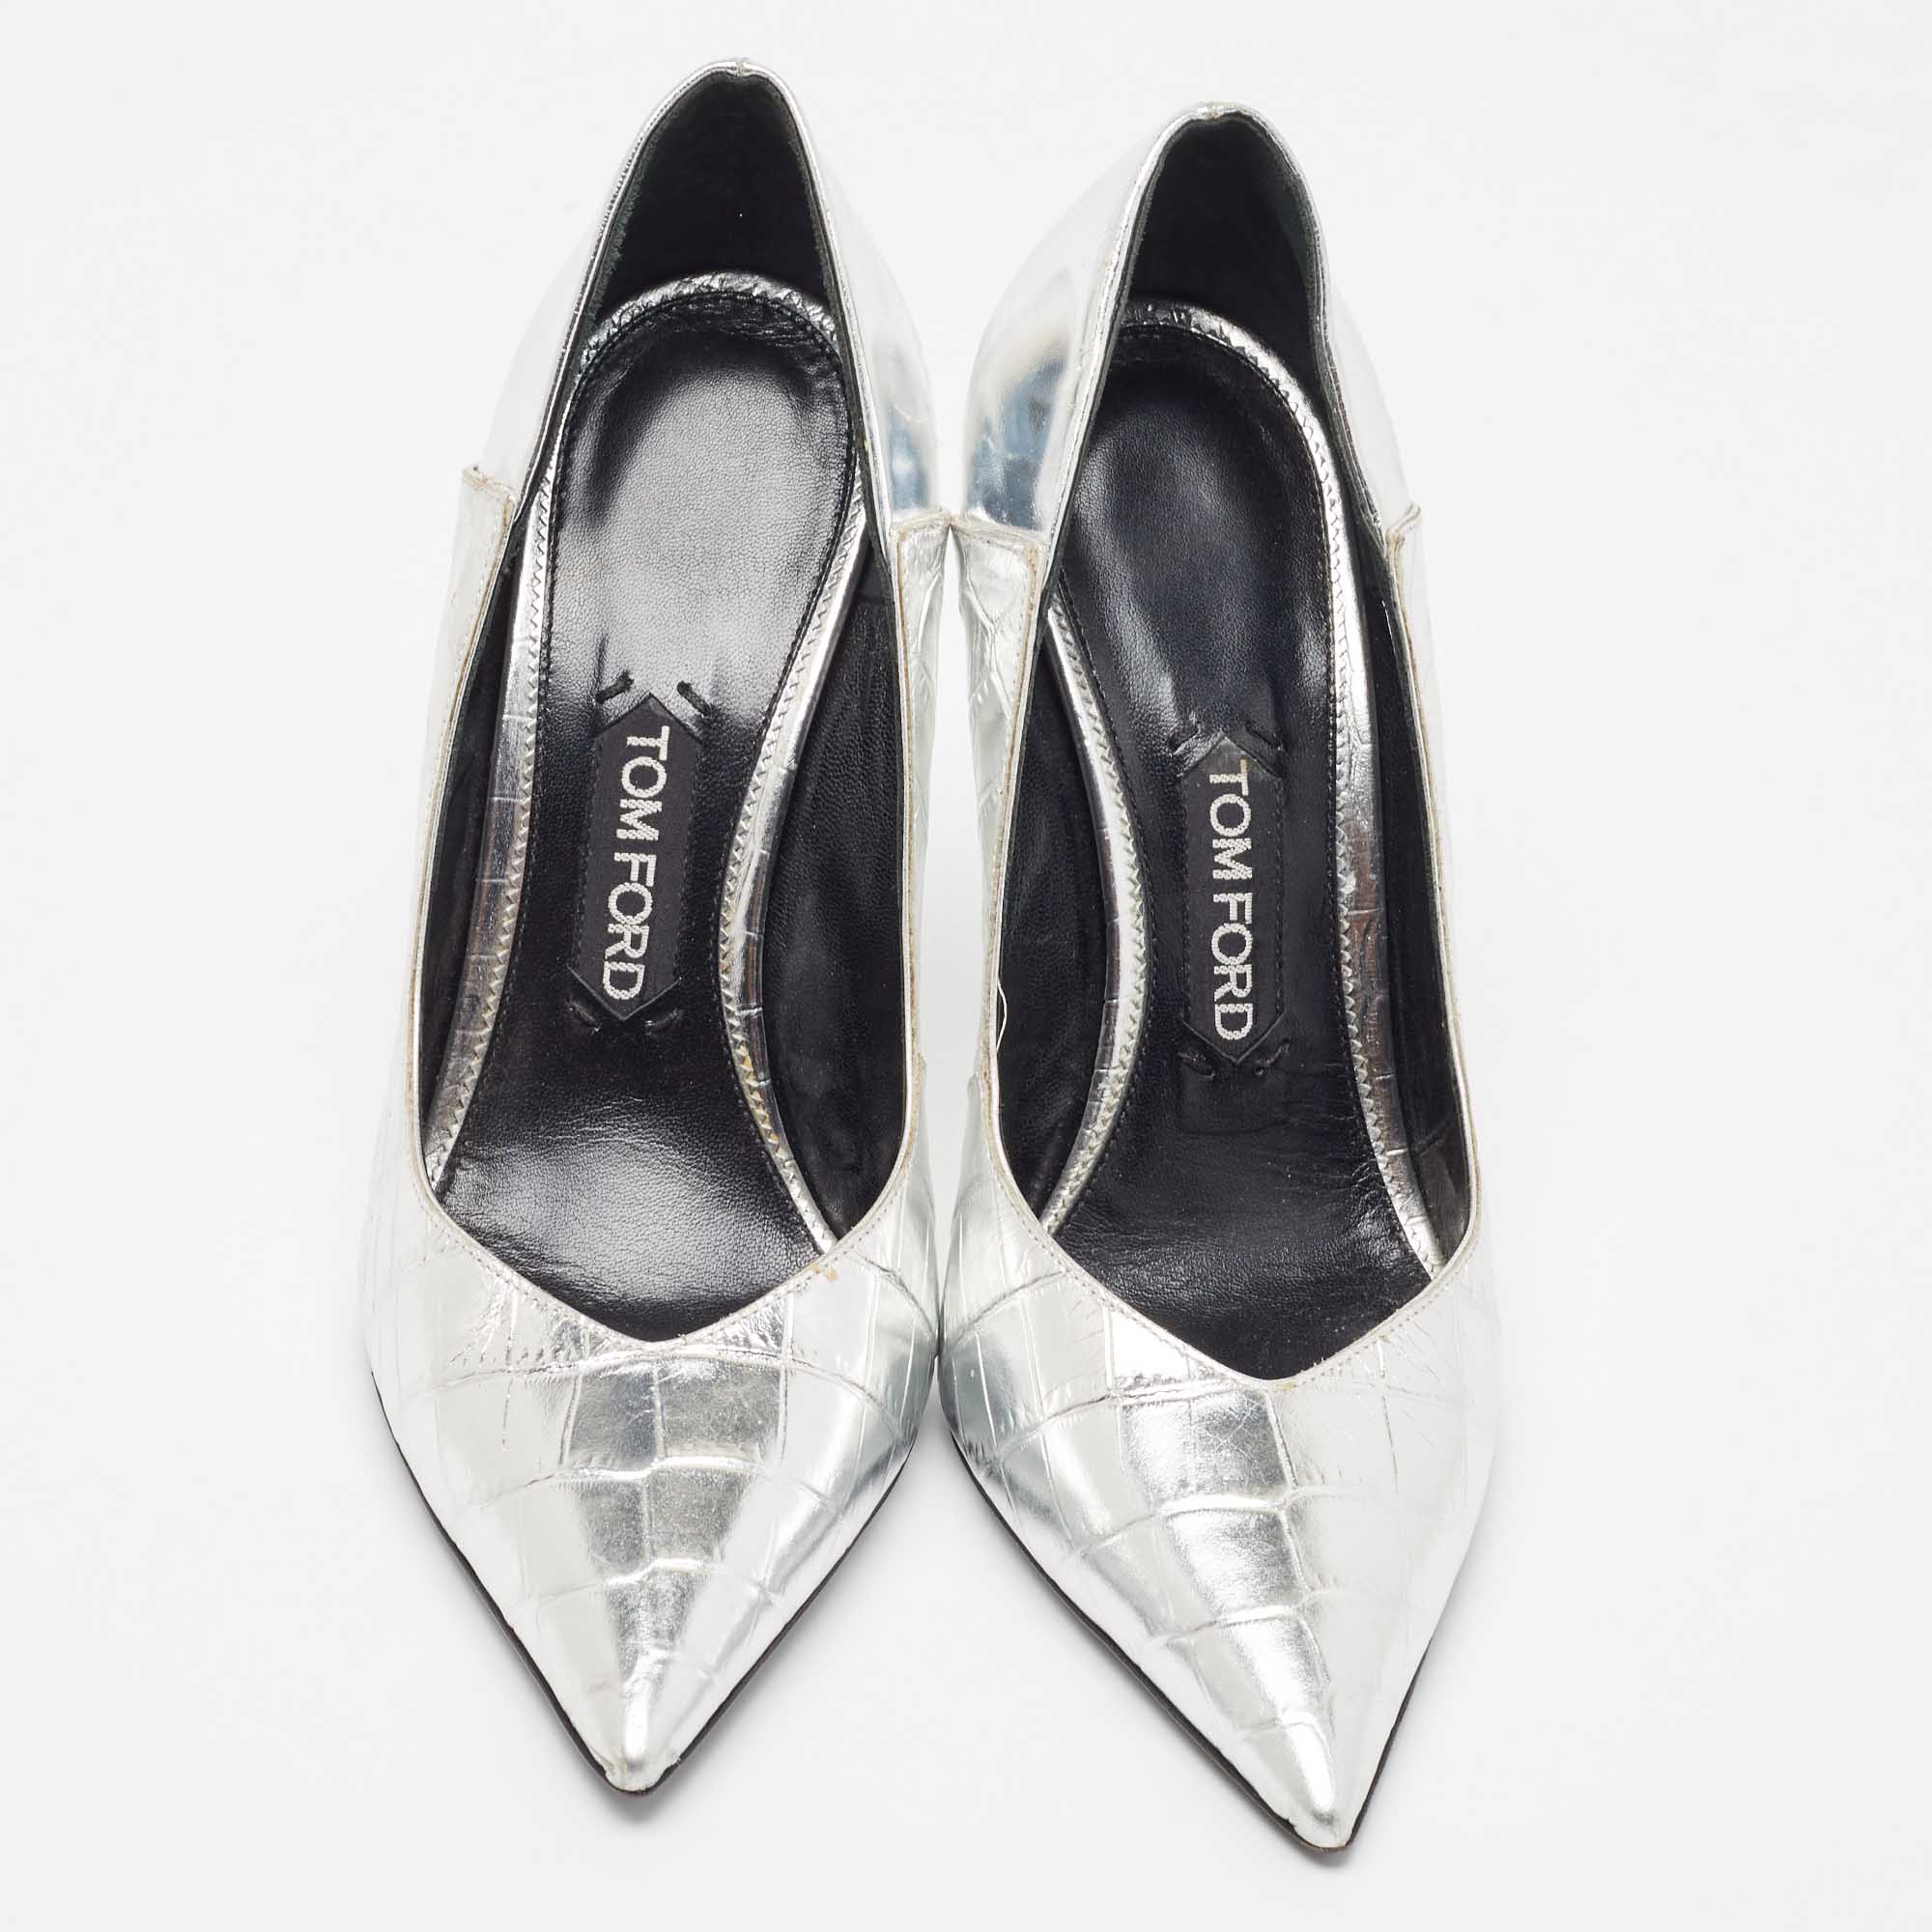 Tom Ford Silver Croc Embossed Leather Wedge Pumps Size 40